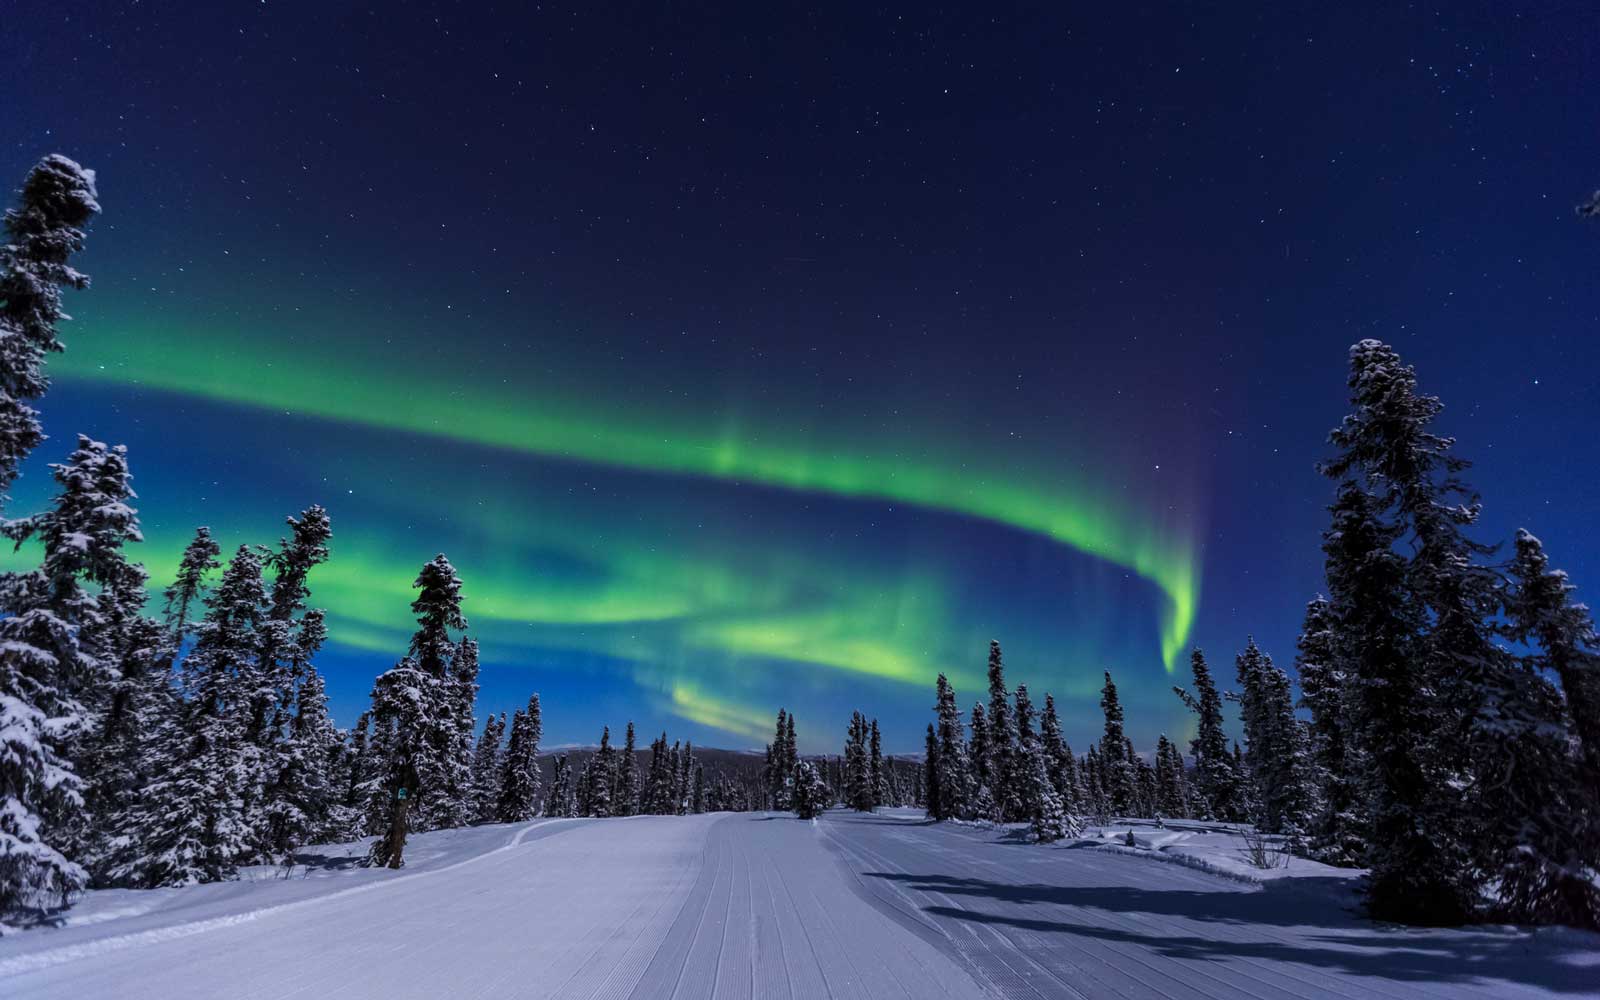 See the Northern Lights in Alaska on a luxury trip with Paramount Cruises